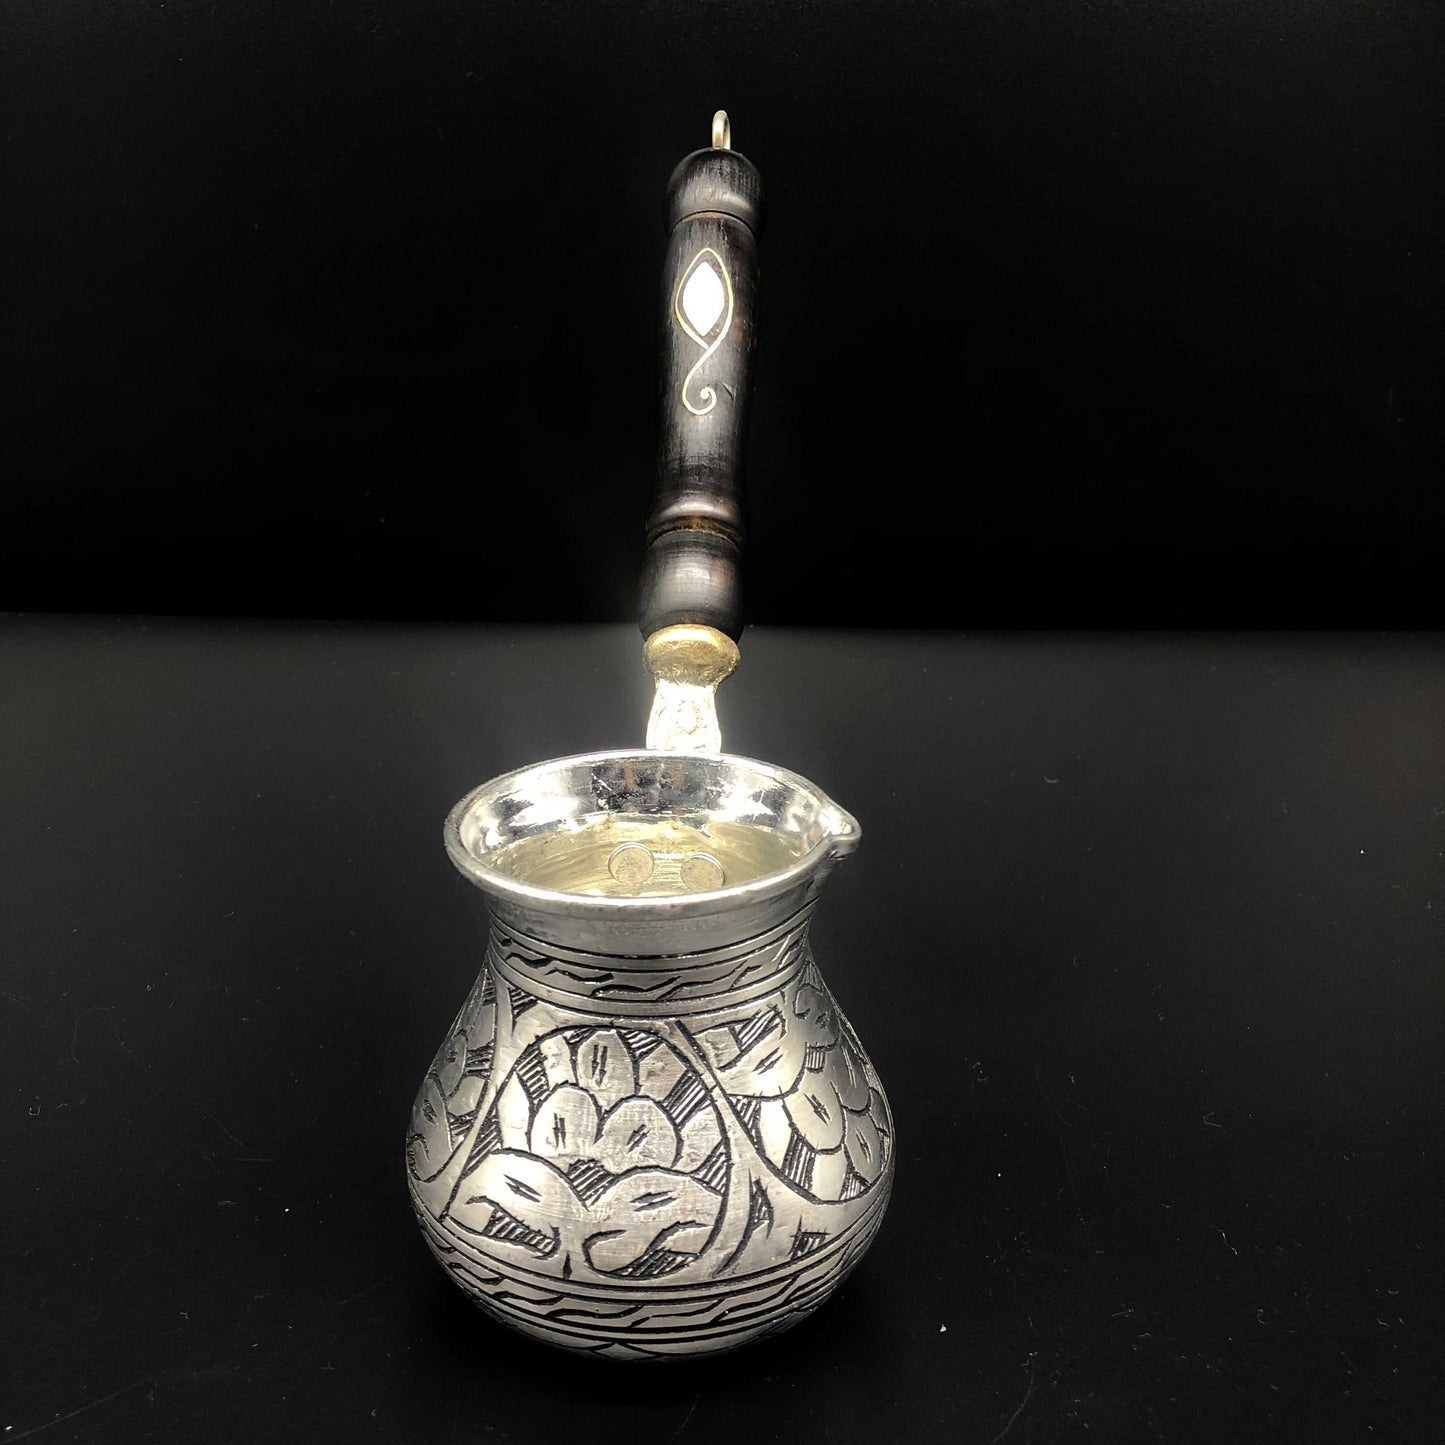 Turkish Tradional Cooper Coffee Maker (cezve) handcrafted and handpainted